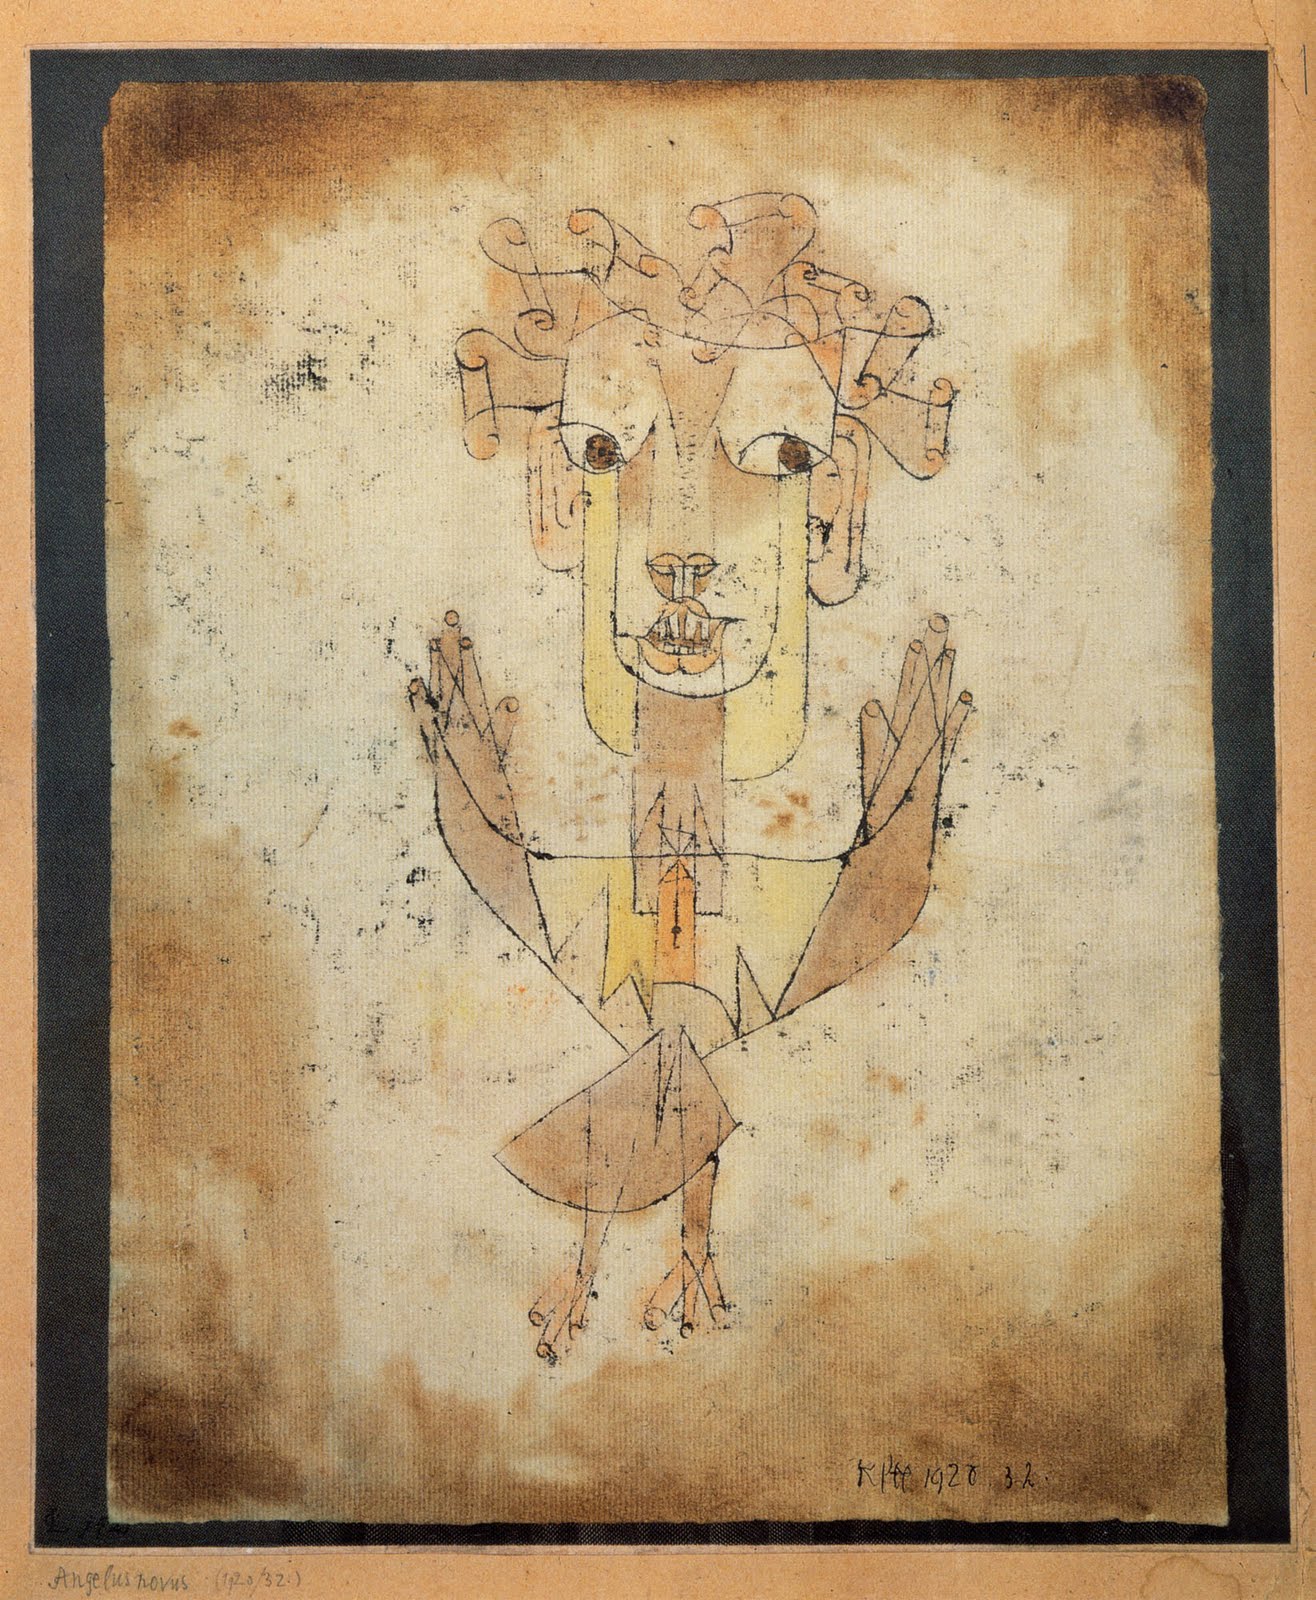 An image of Paul Klee's print Angelus Novus, a drawing of an angel on a sepia-toned background